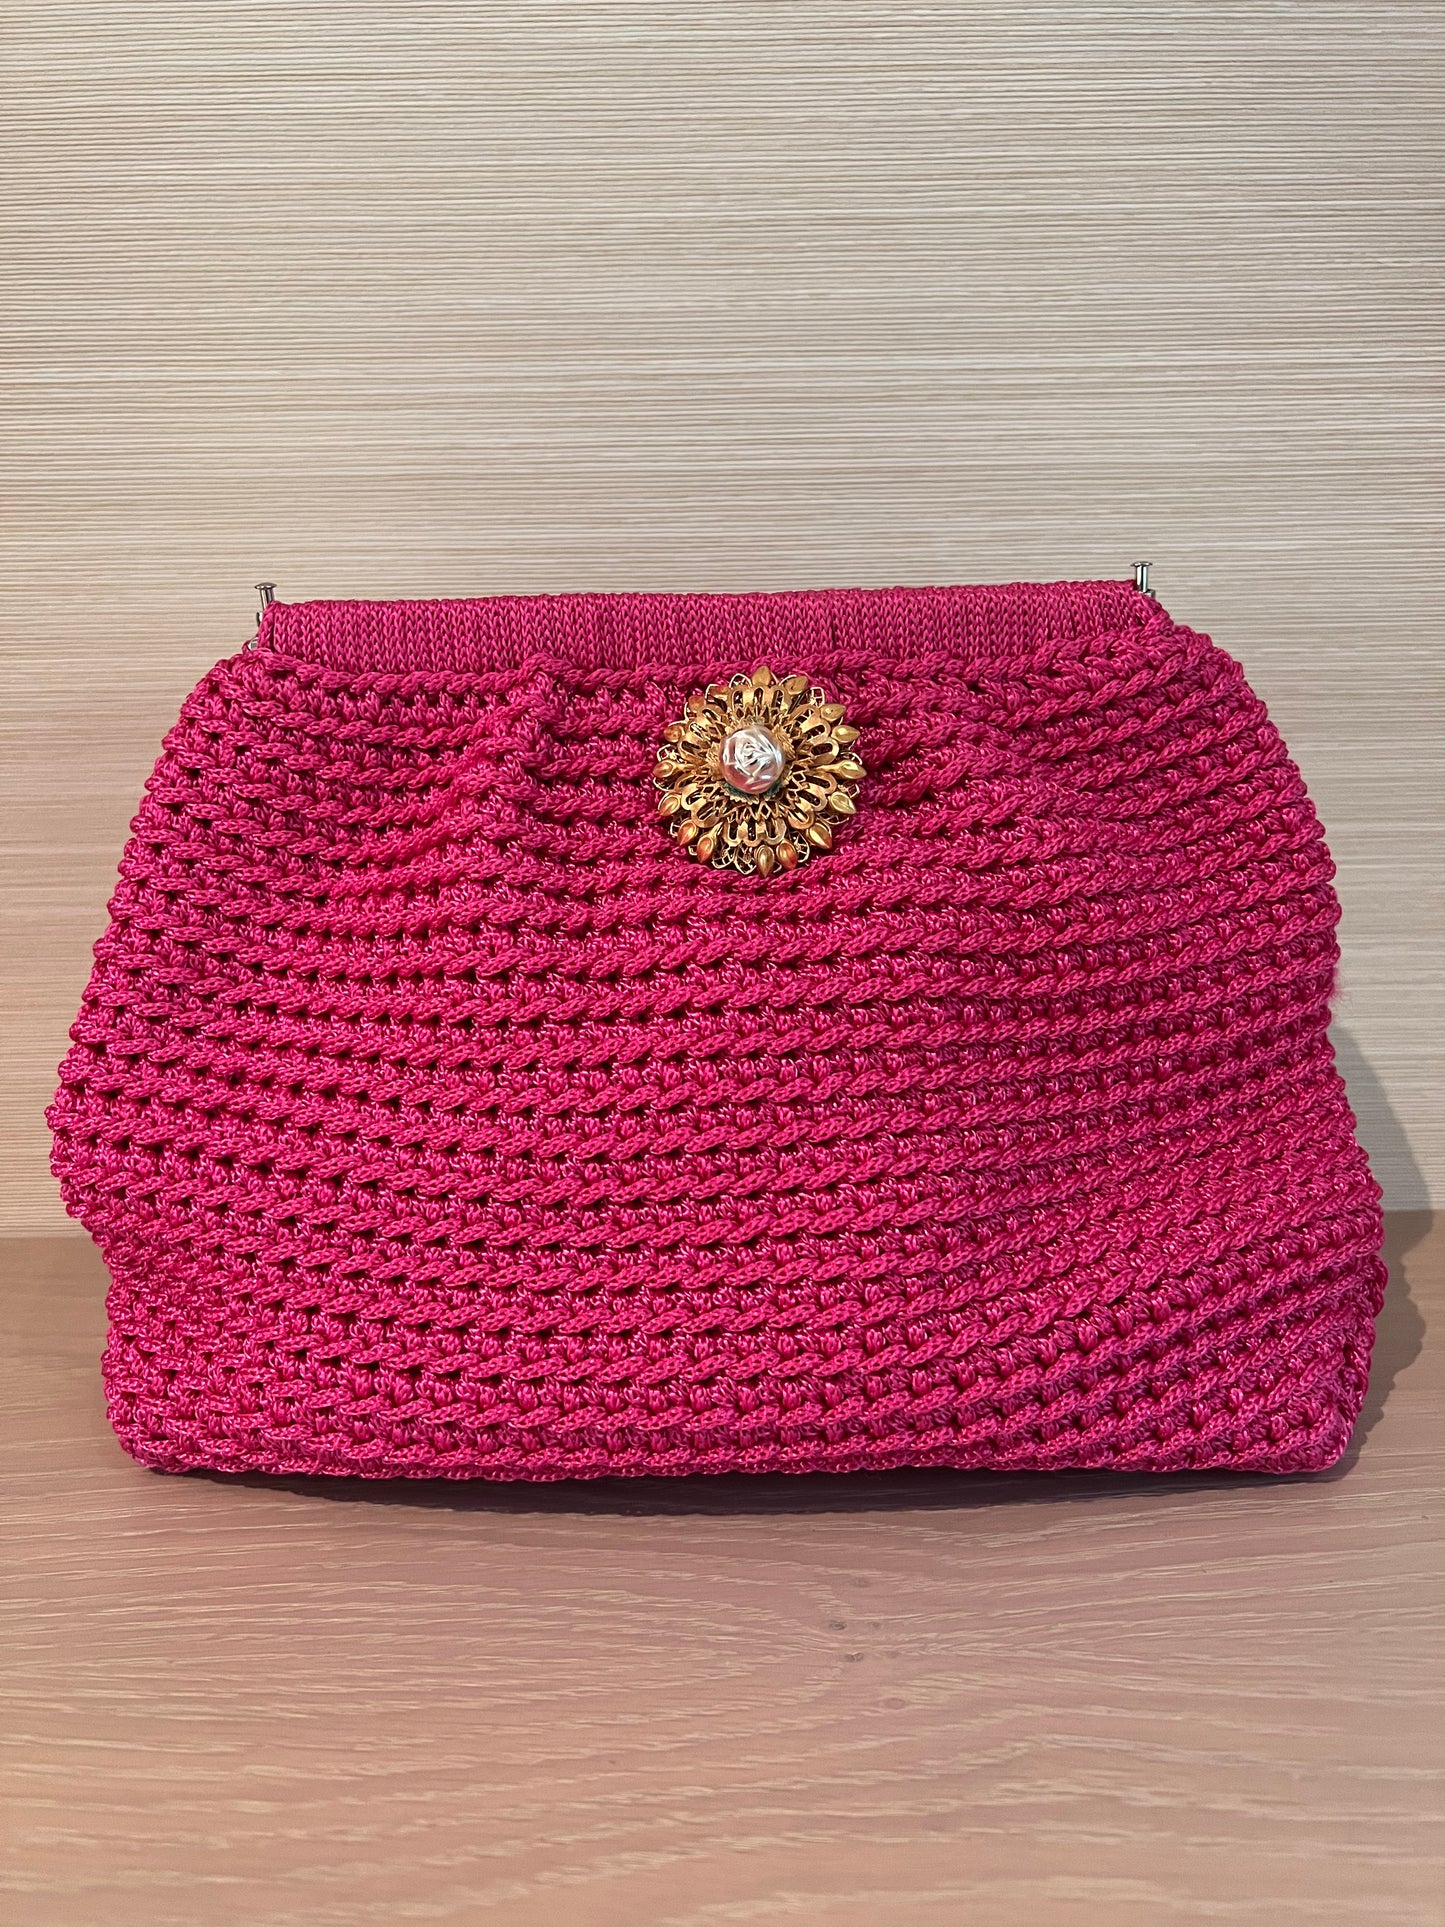 The Pearl Flower Clutch